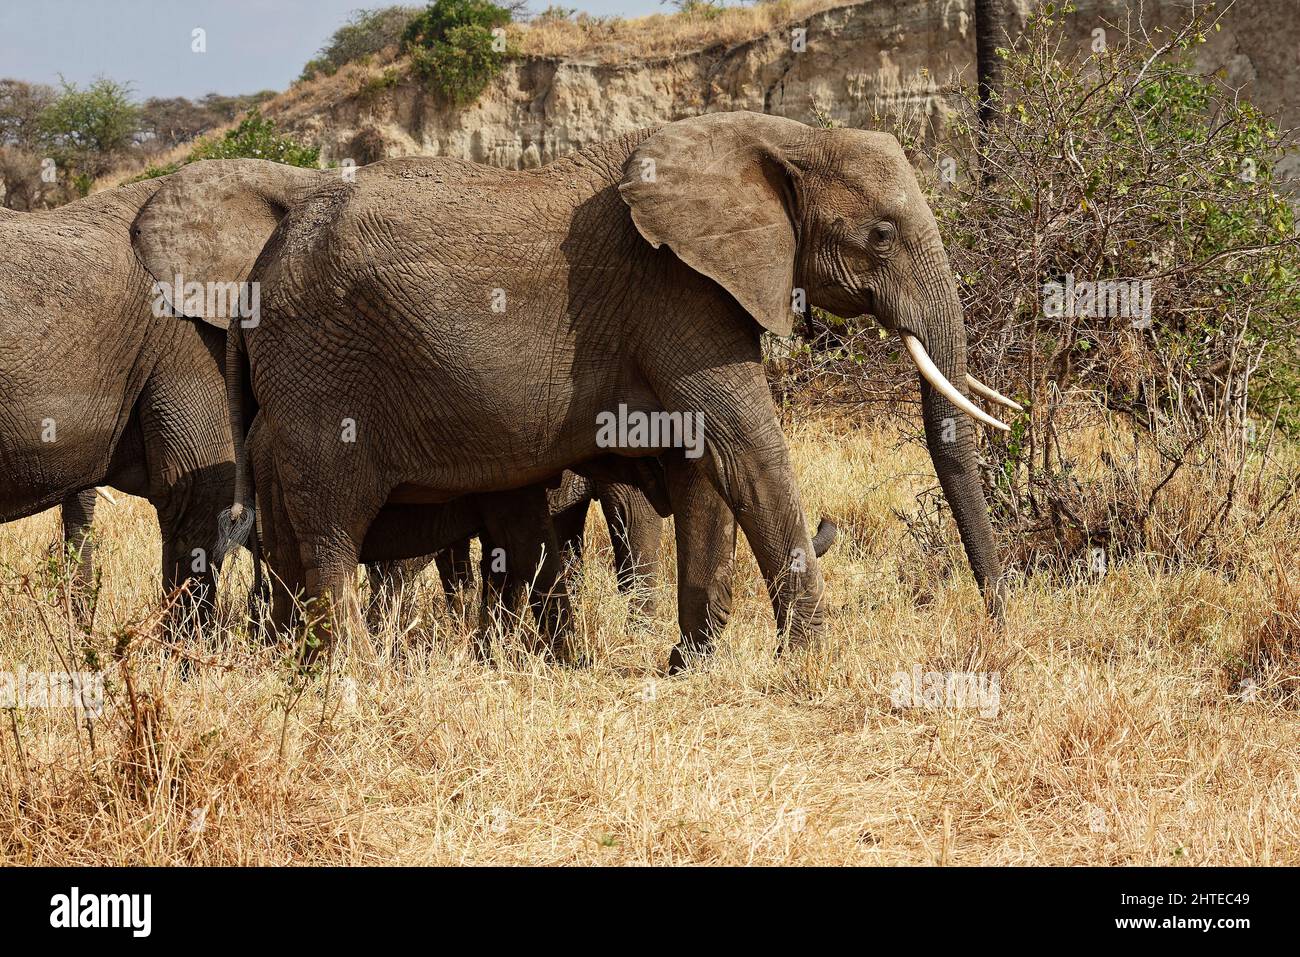 African elephant walking, side view, full length portrait, Loxodanta africana, herbivores, largest land mammal, muscular trunk, tusks, large ears, wil Stock Photo